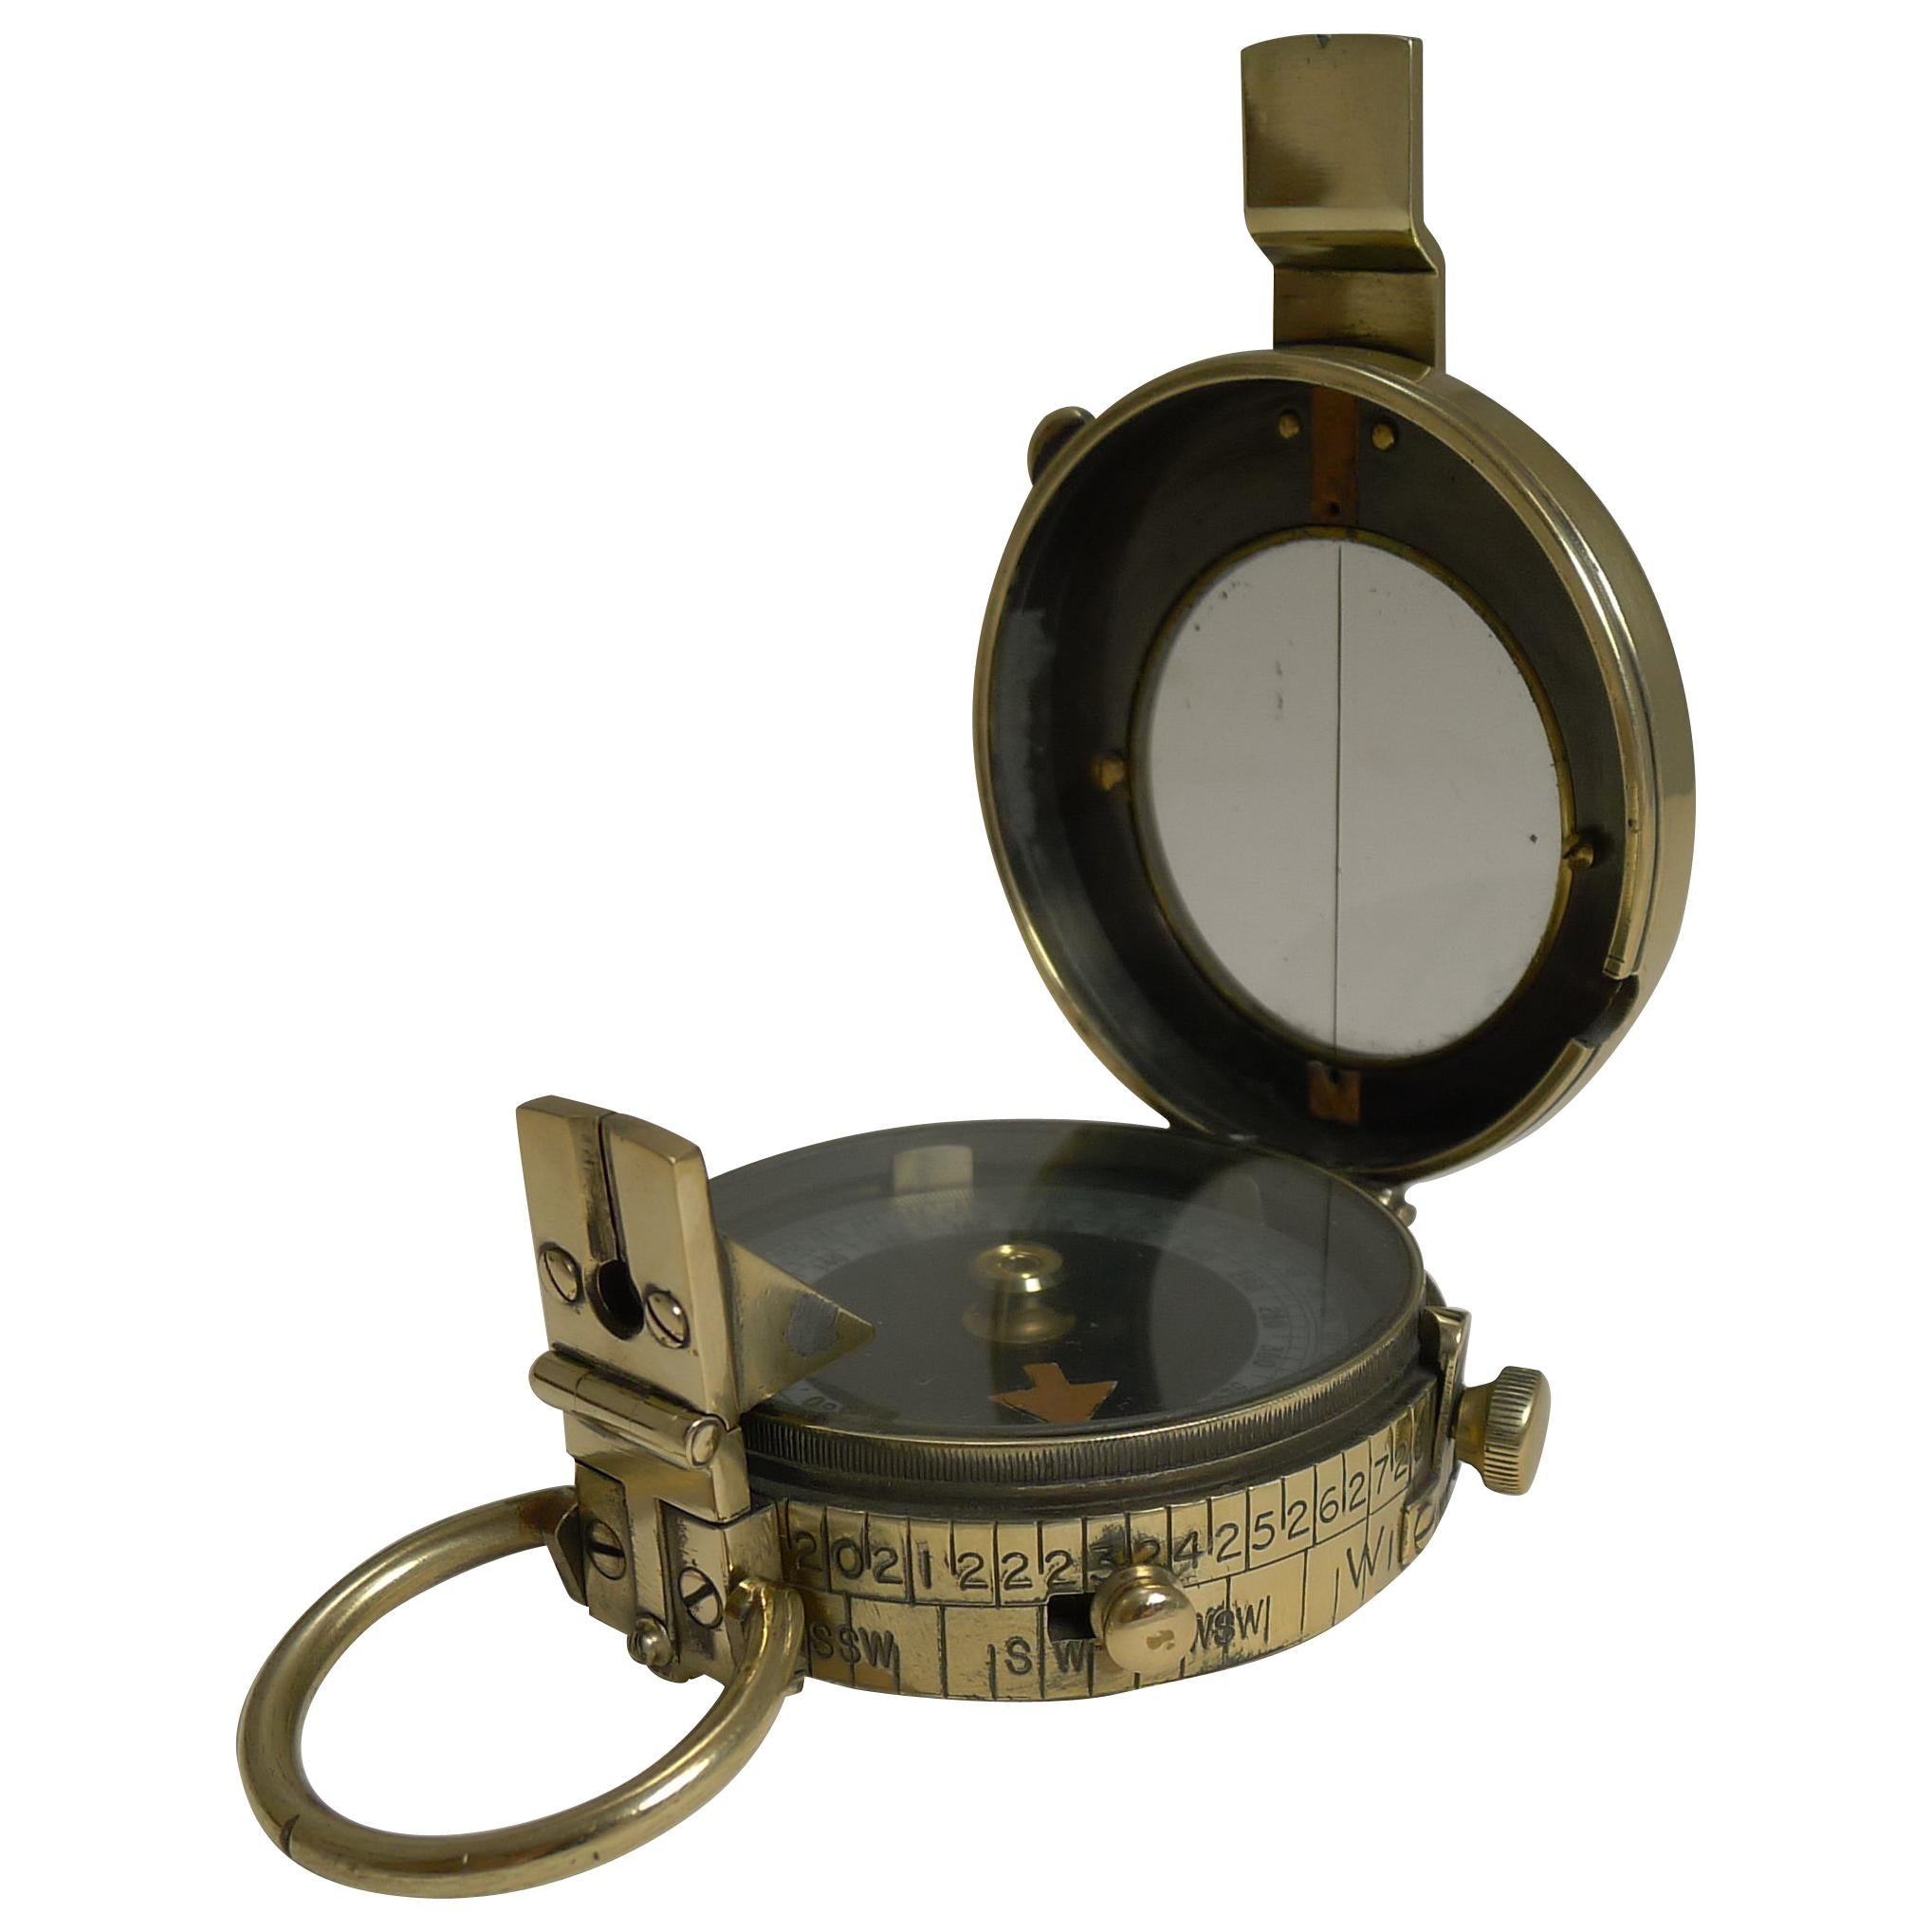 WWI 1918 British Army Officer's Compass by J H Steward, London